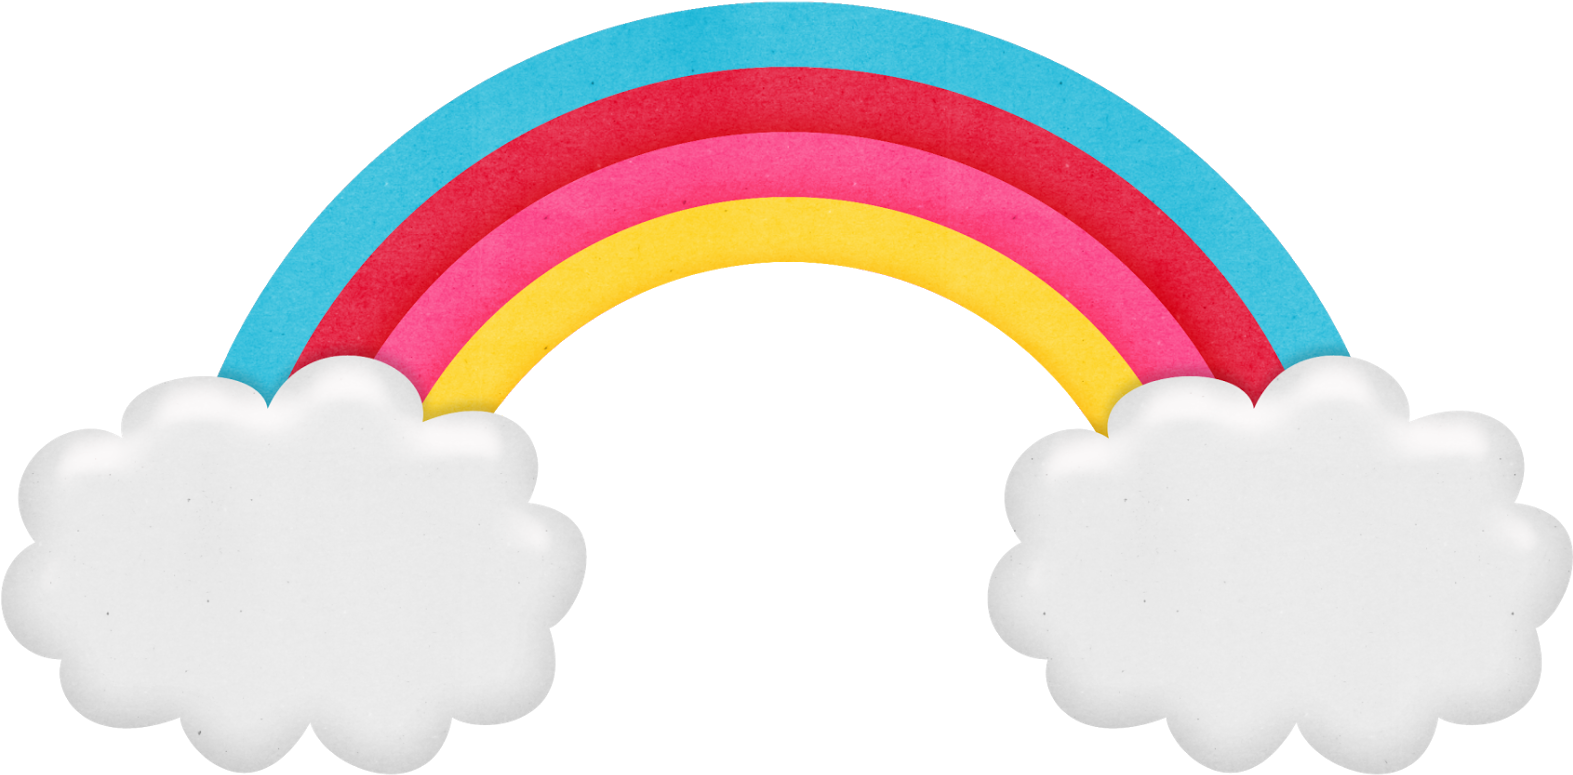 A Rainbow With Clouds On A Black Background